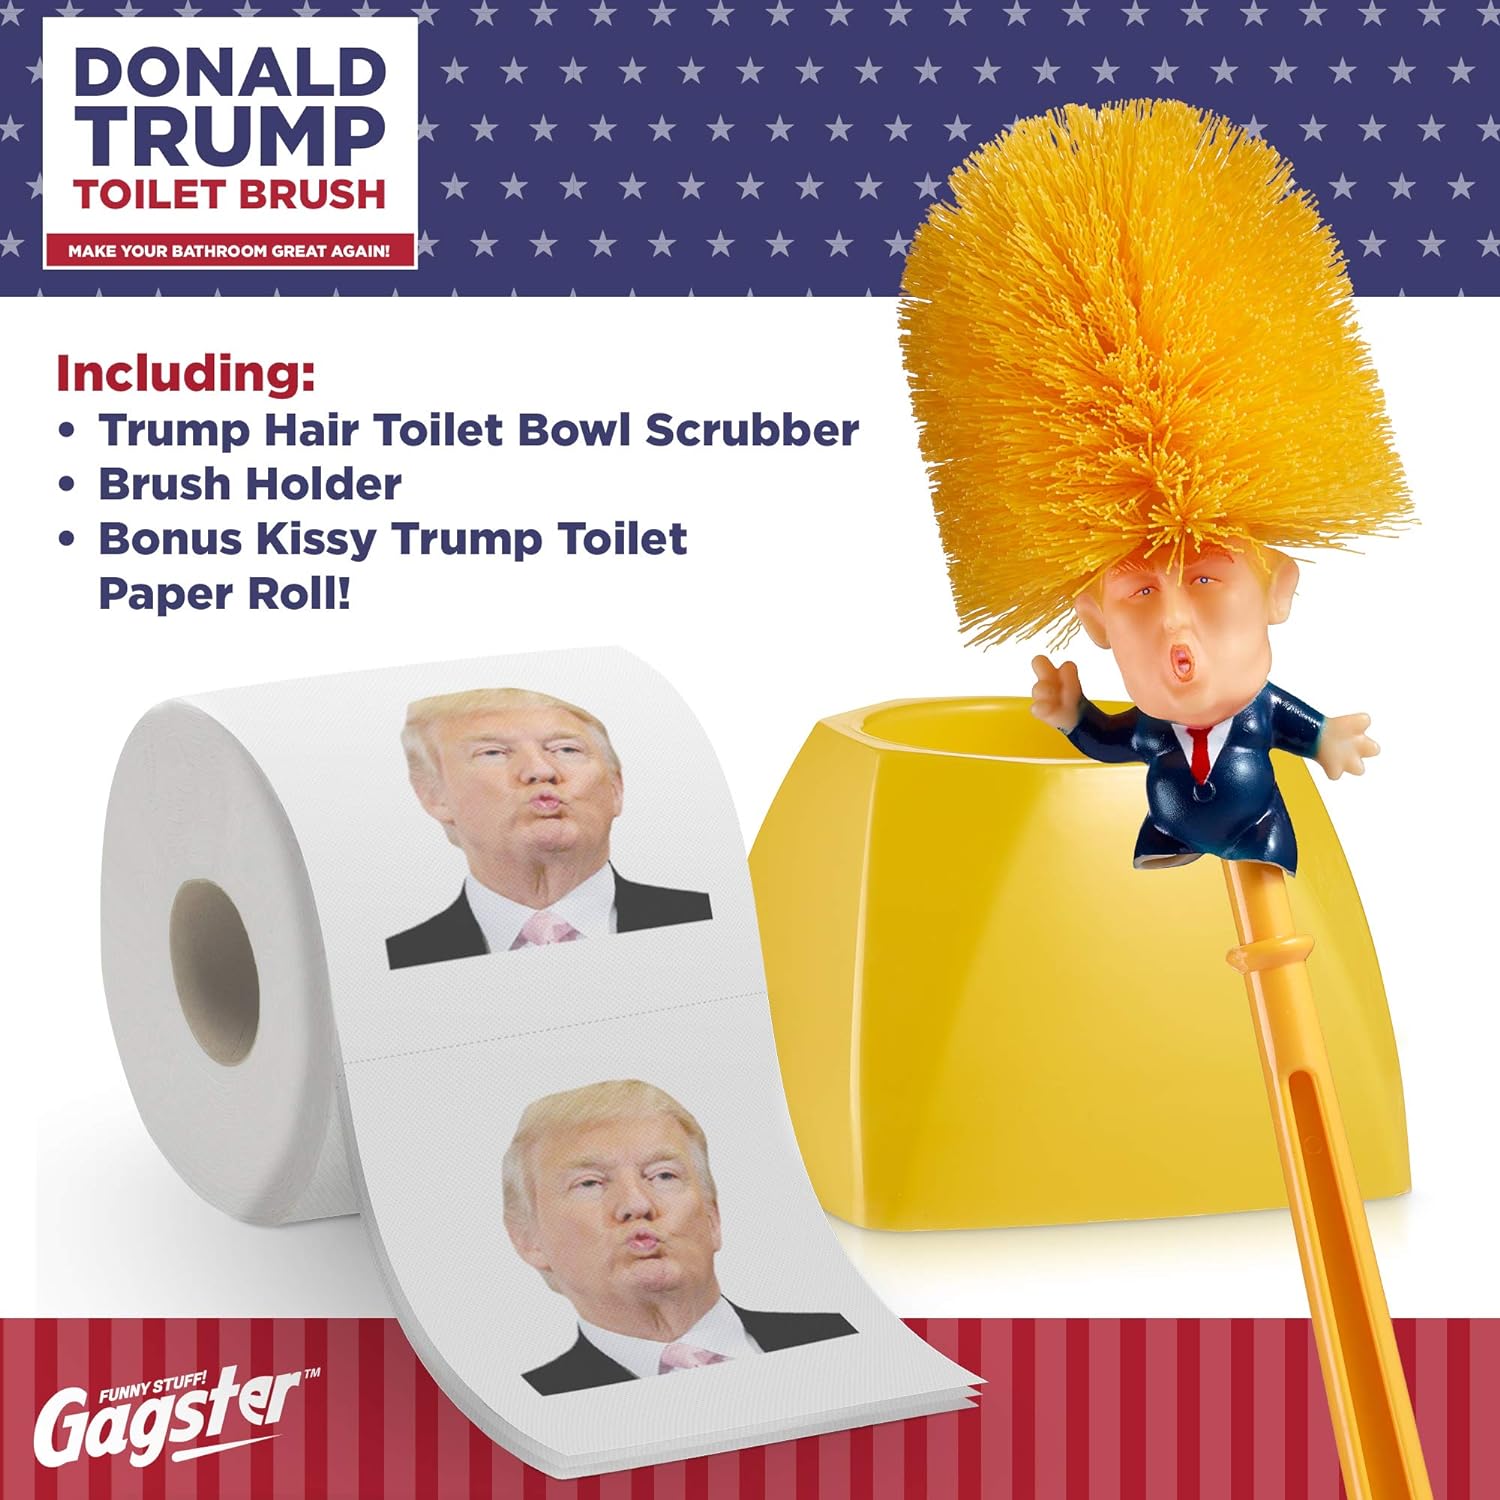 Donald Trump Toilet Brush and Toilet Paper Roll Bundle